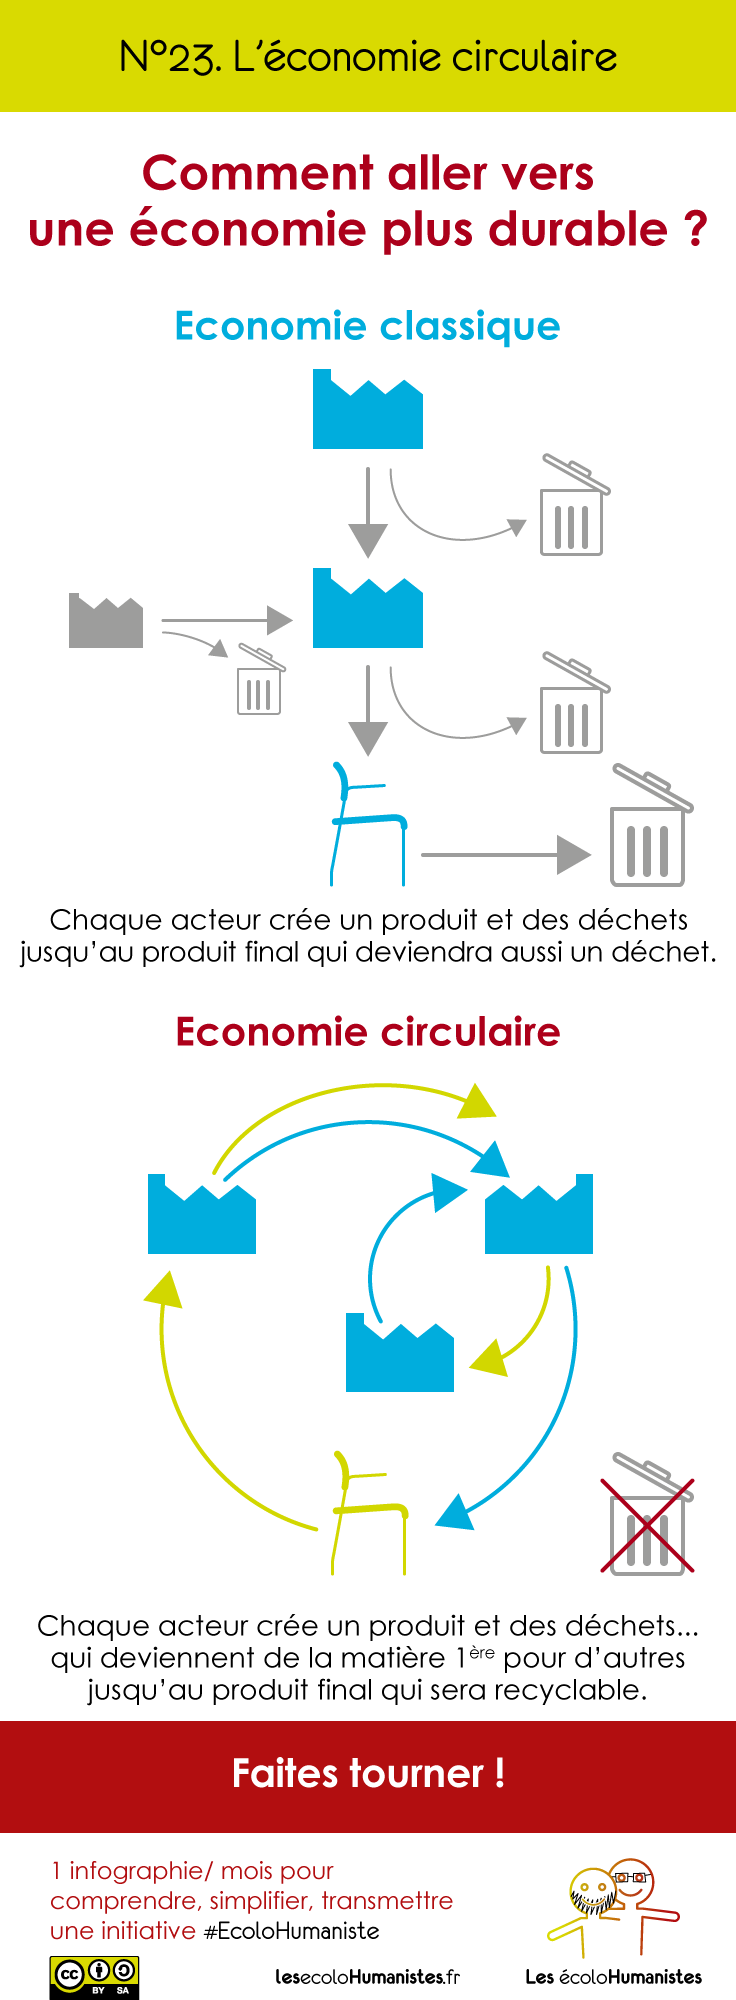 https://lesecolohumanistes.fr/wp-content/uploads/2016/11/23-EcoCirculaire.png